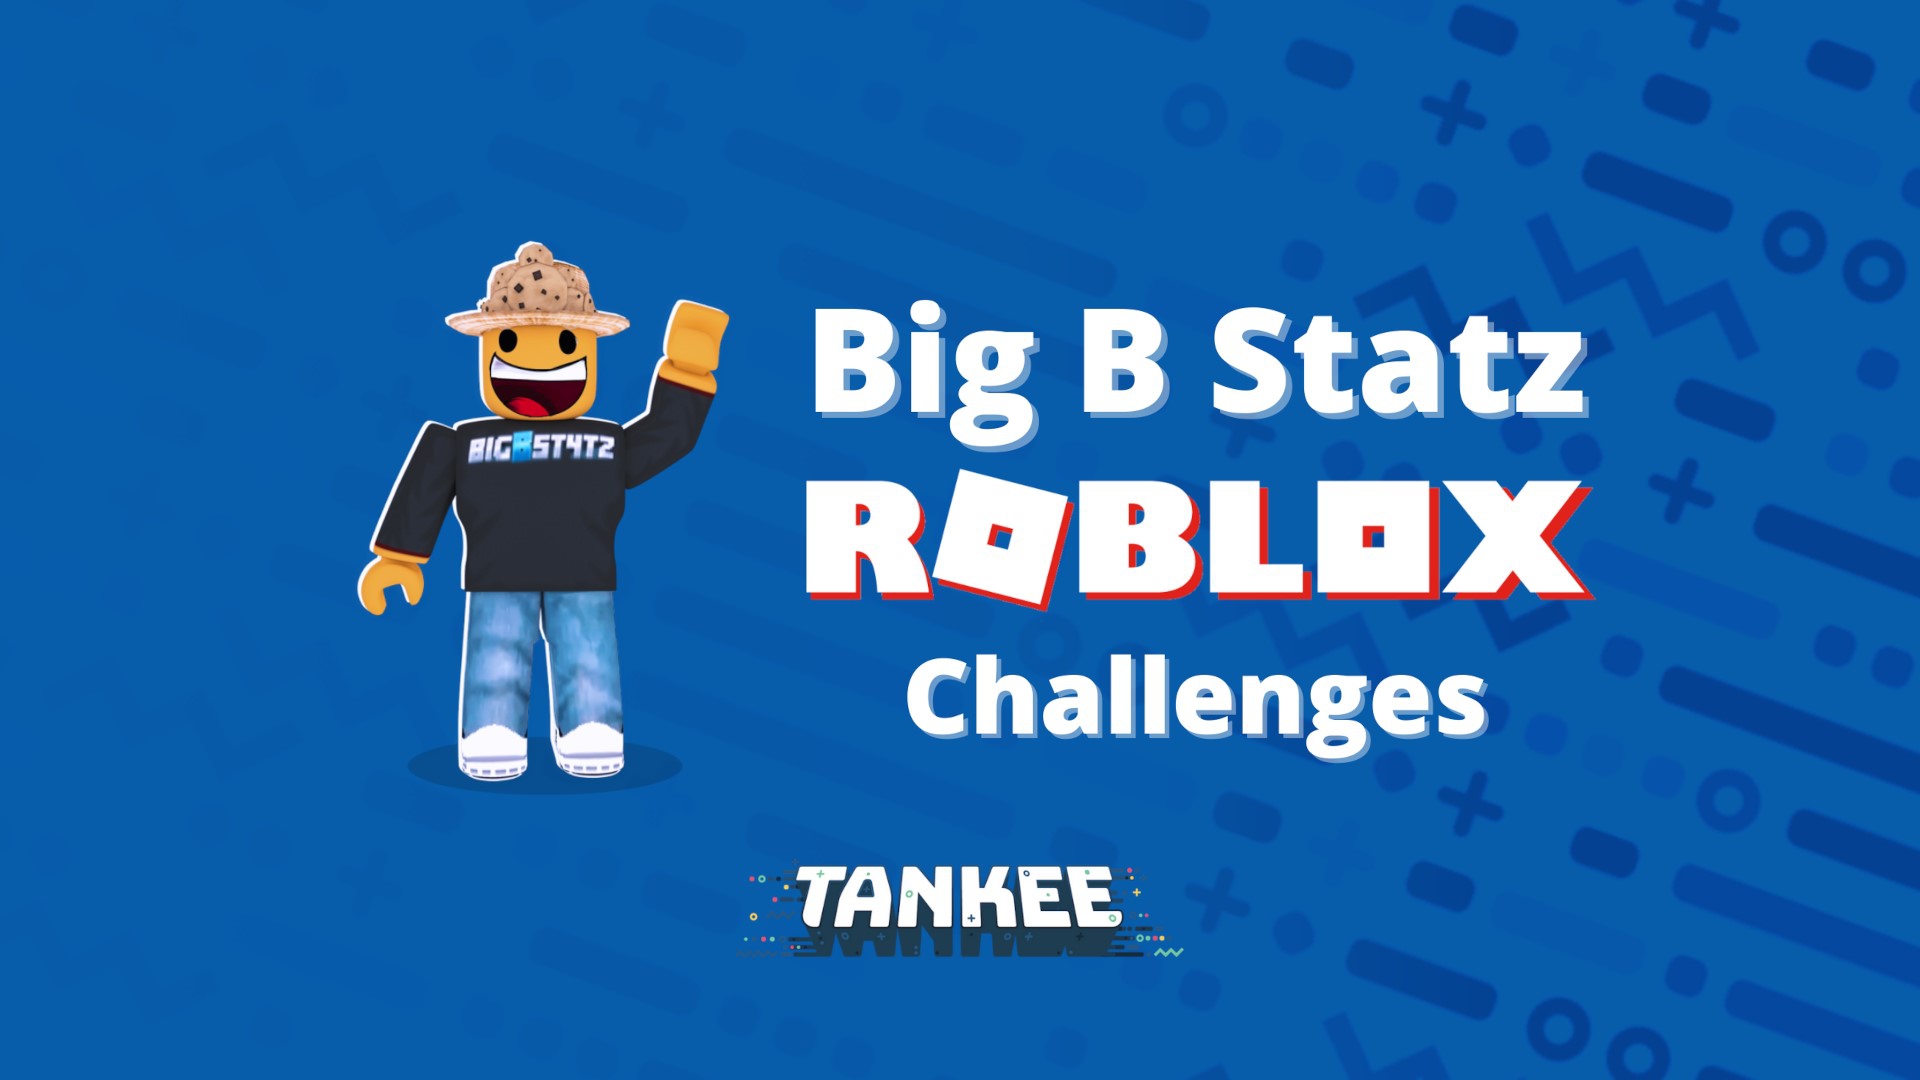 Bigb Roblox Challenges By Tankee Season 2 Episodes Streaming Online For Free The Roku Channel Roku - roblox altimint freeze tag